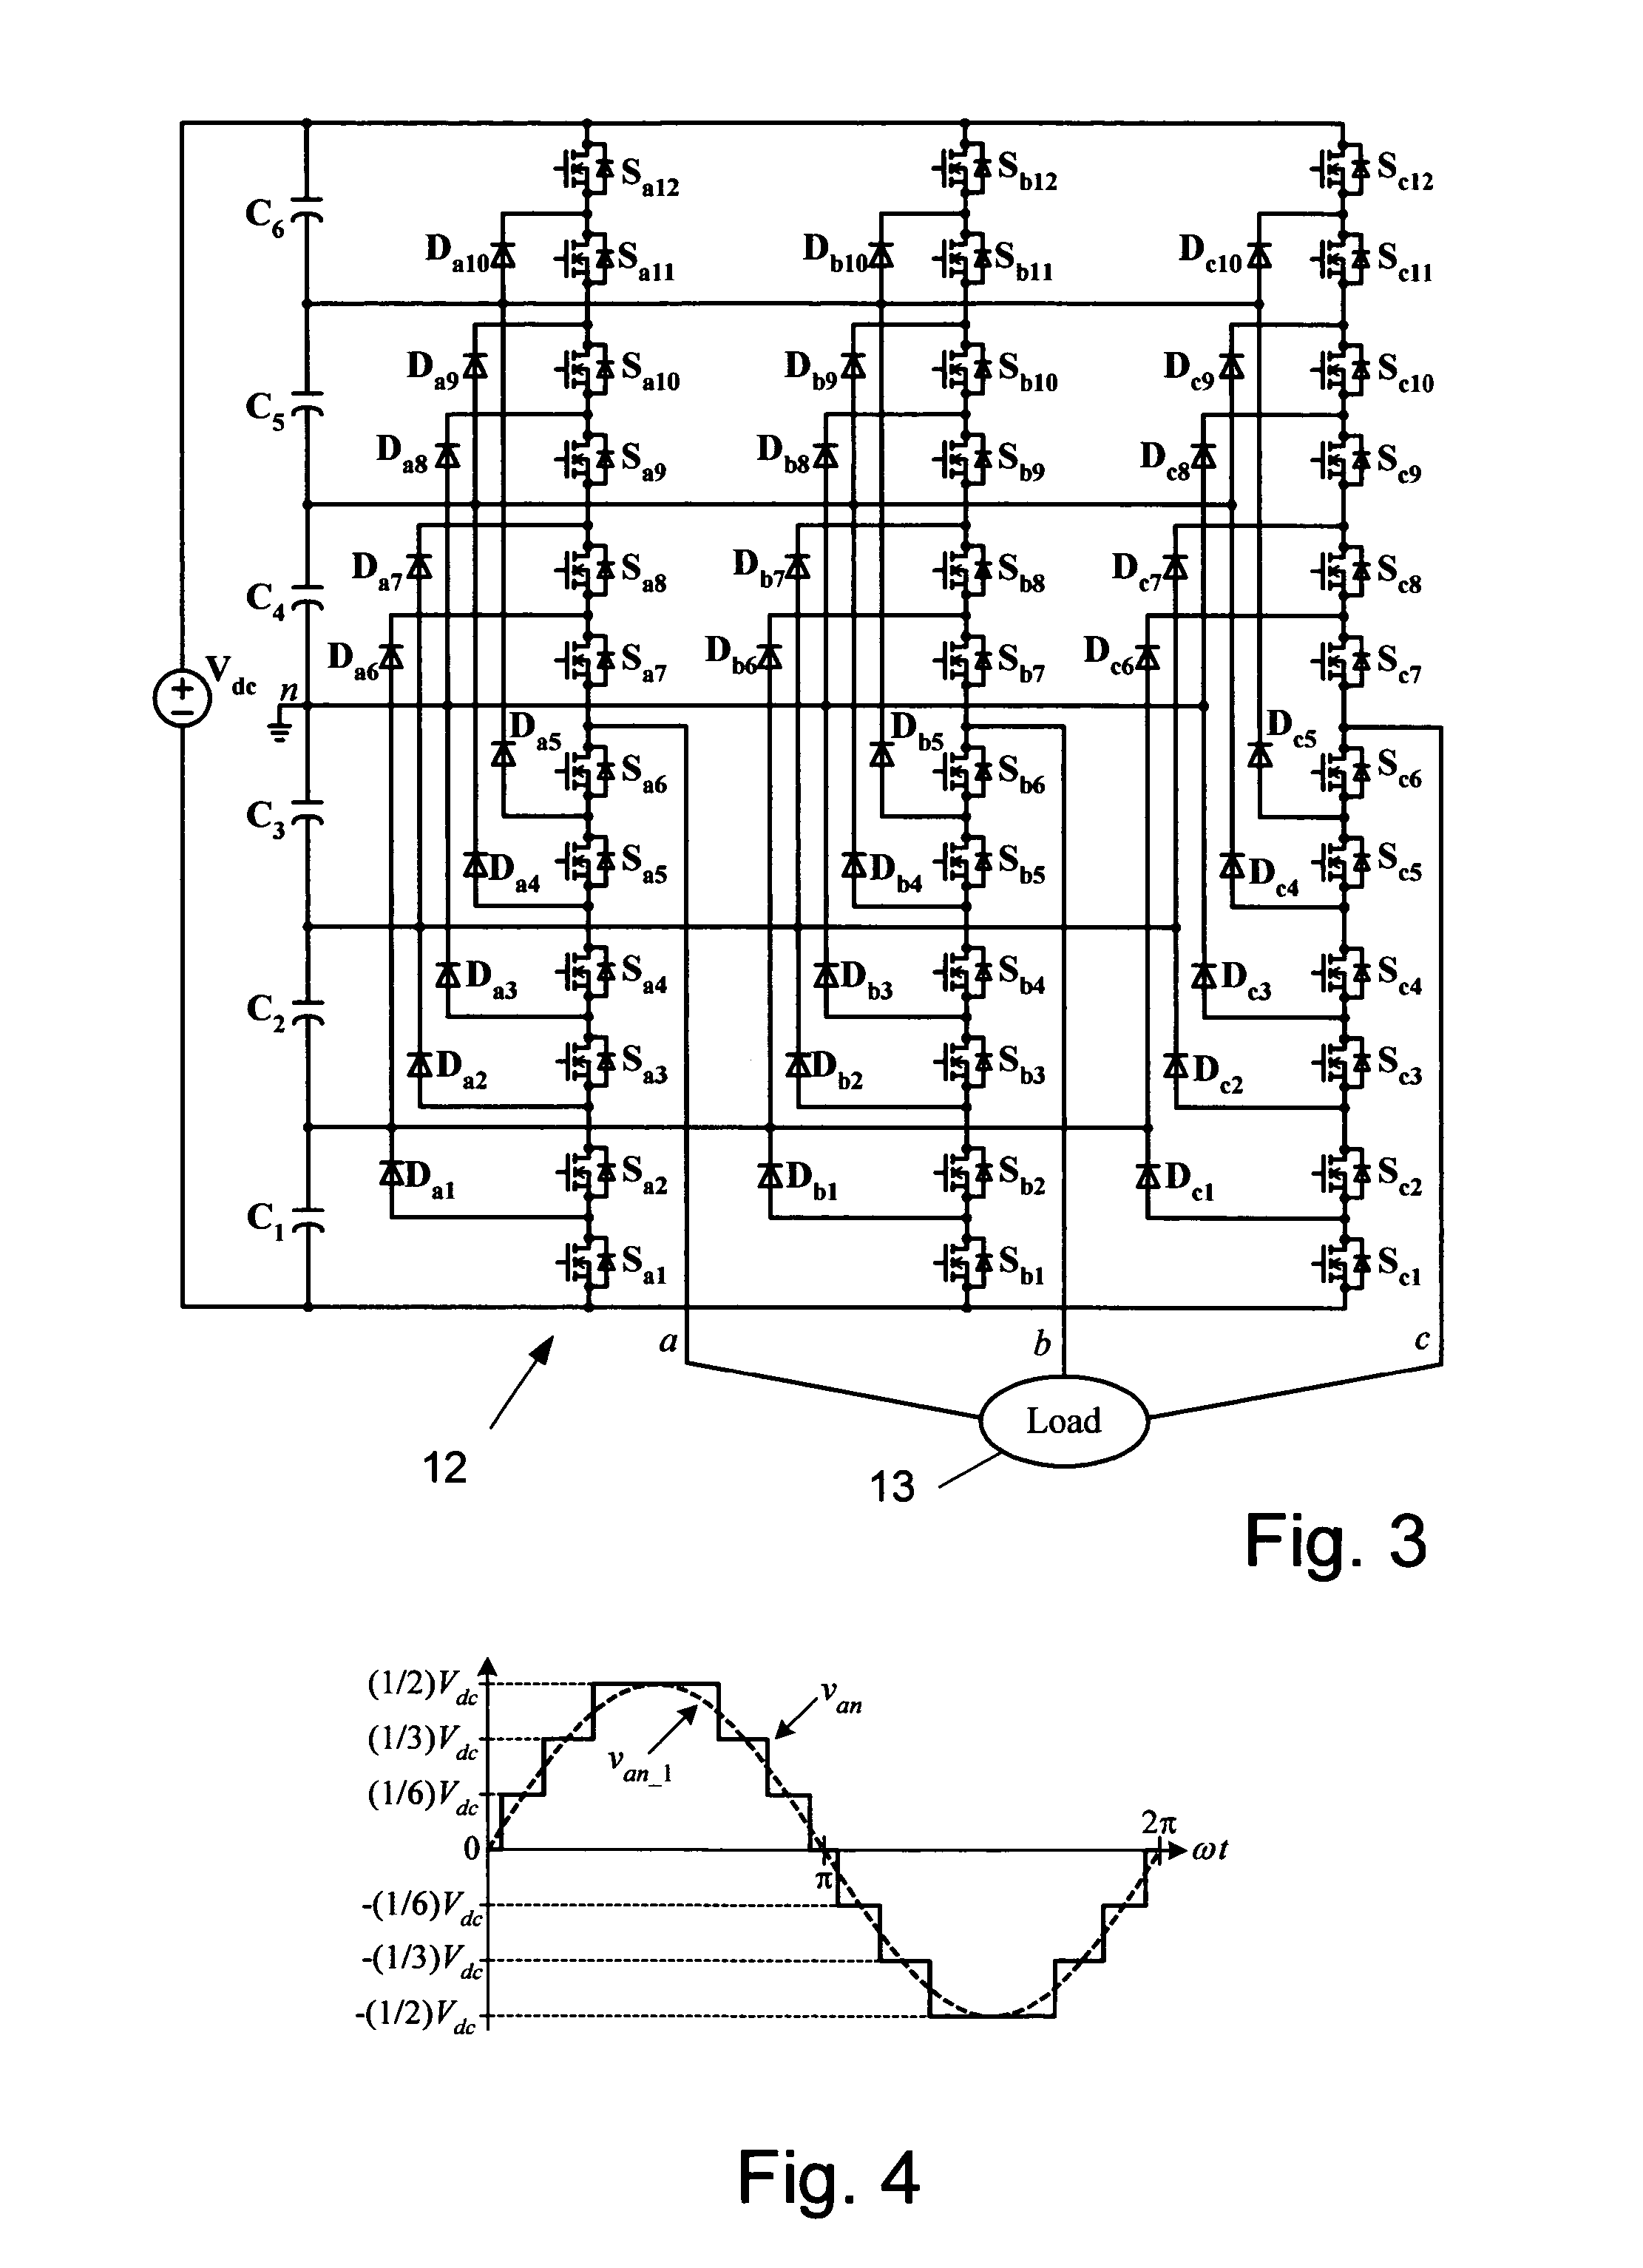 Multi-level DC bus inverter for providing sinusoidal and pwm electrical machine voltages